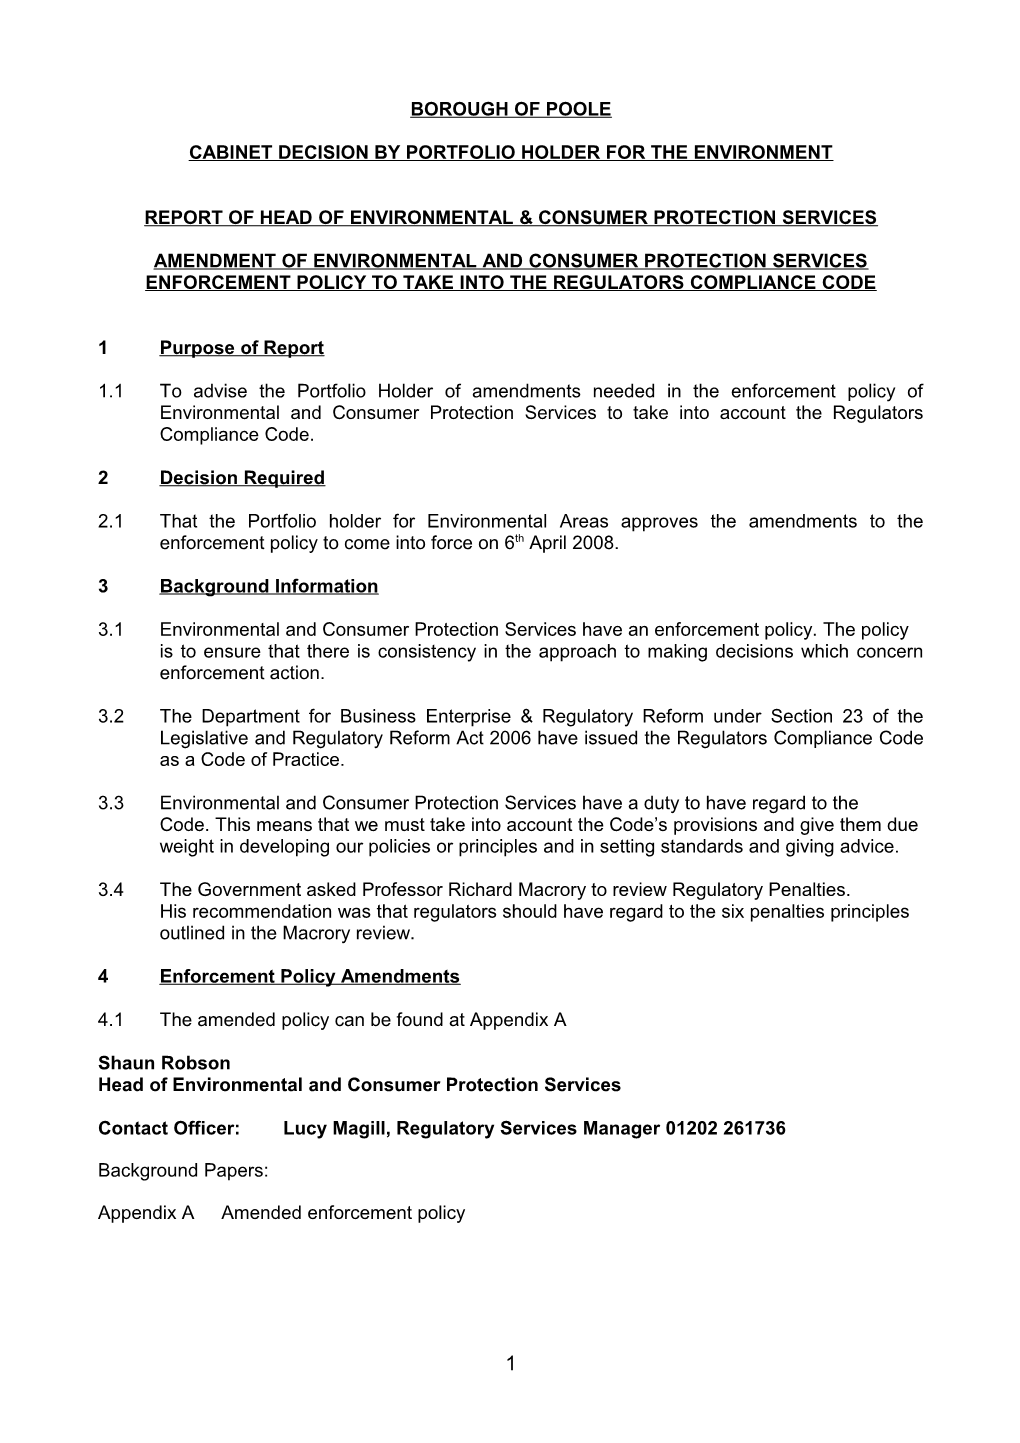 PFD Cllr Collier - 13032008 - Enforcement Policy - Report